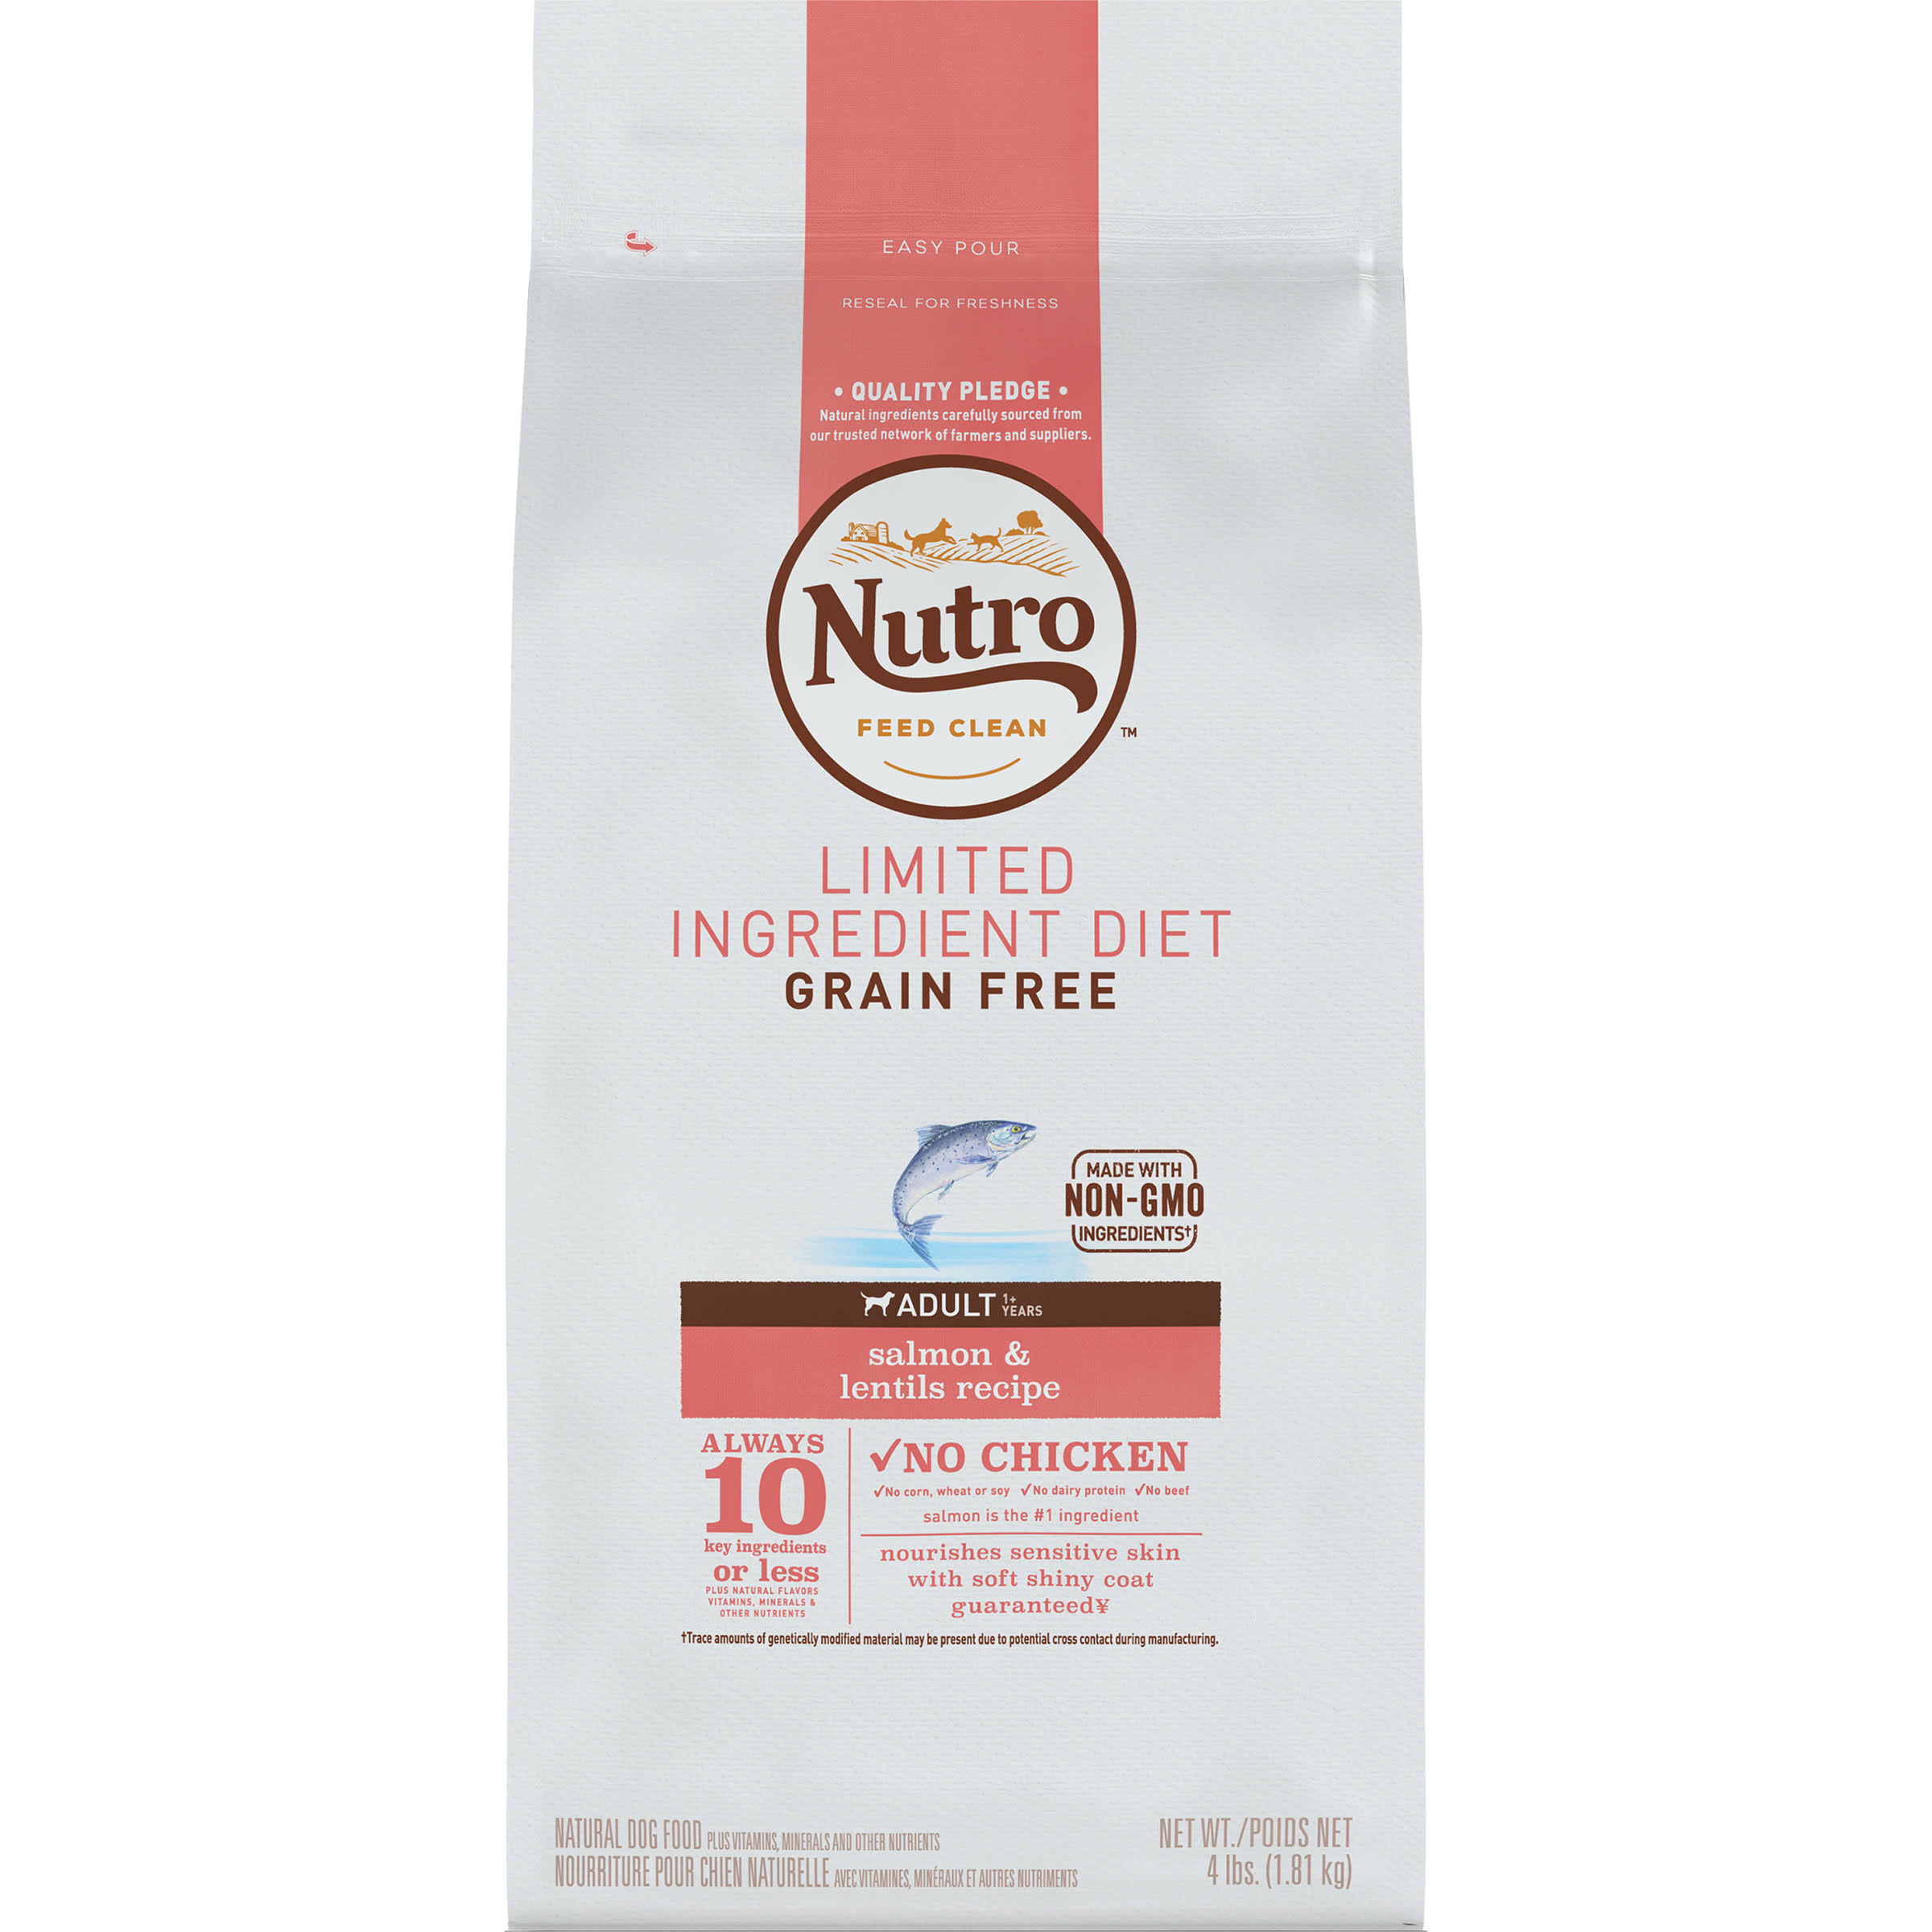 Nutro Limited Ingredient Diet Adult Dog Food - Salmon and Lentils Recipe, 4lbs